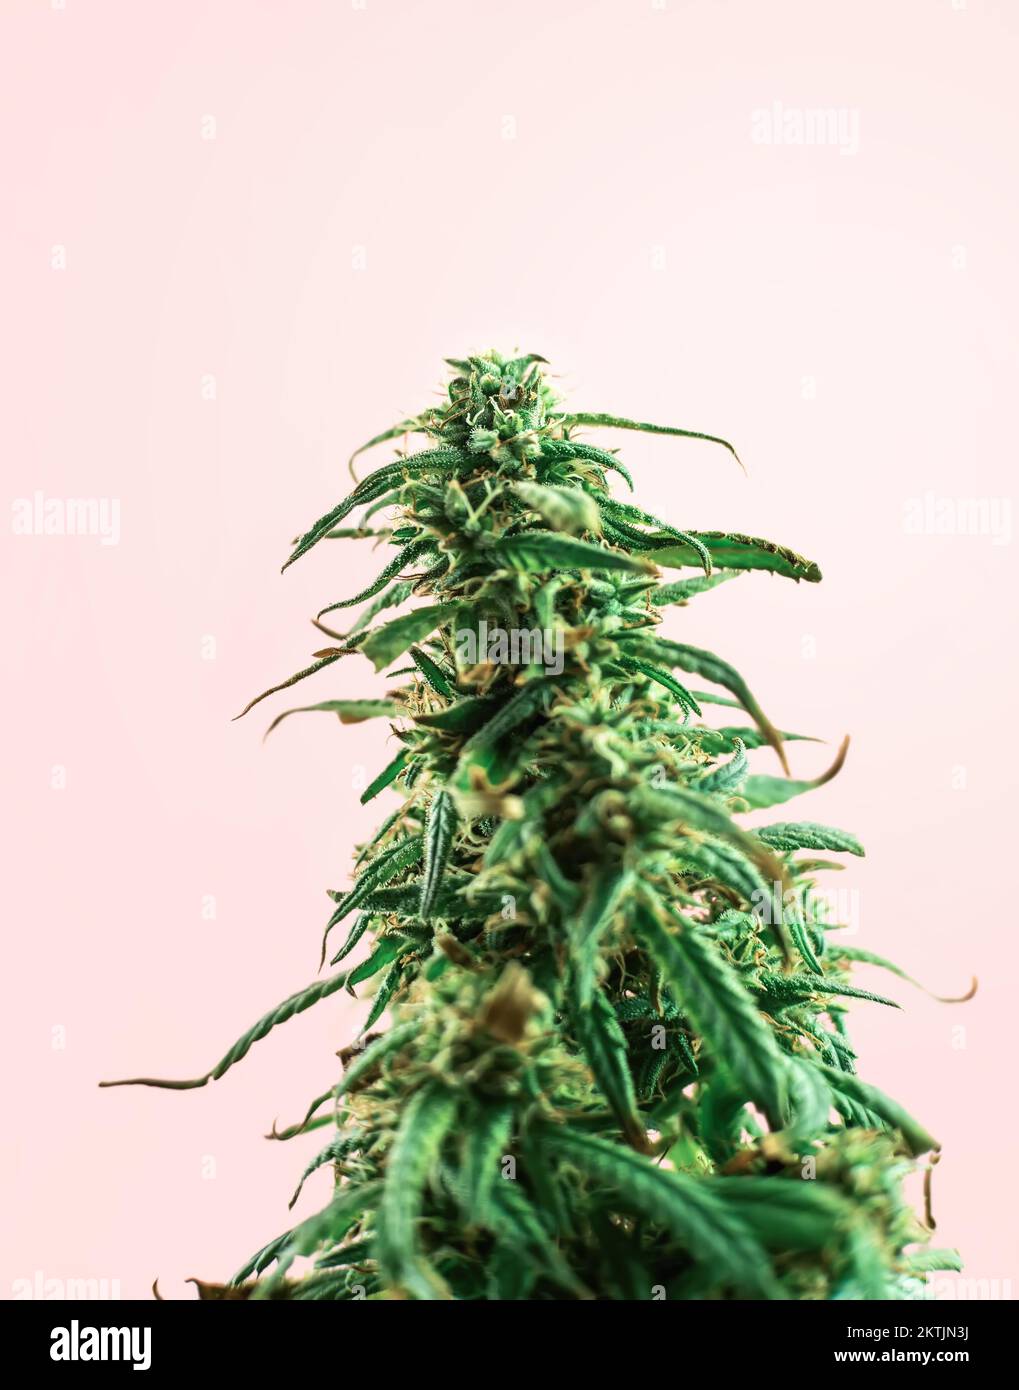 Indoor Cannabis plant, branch of marijuana on a pink background with copy space Stock Photo